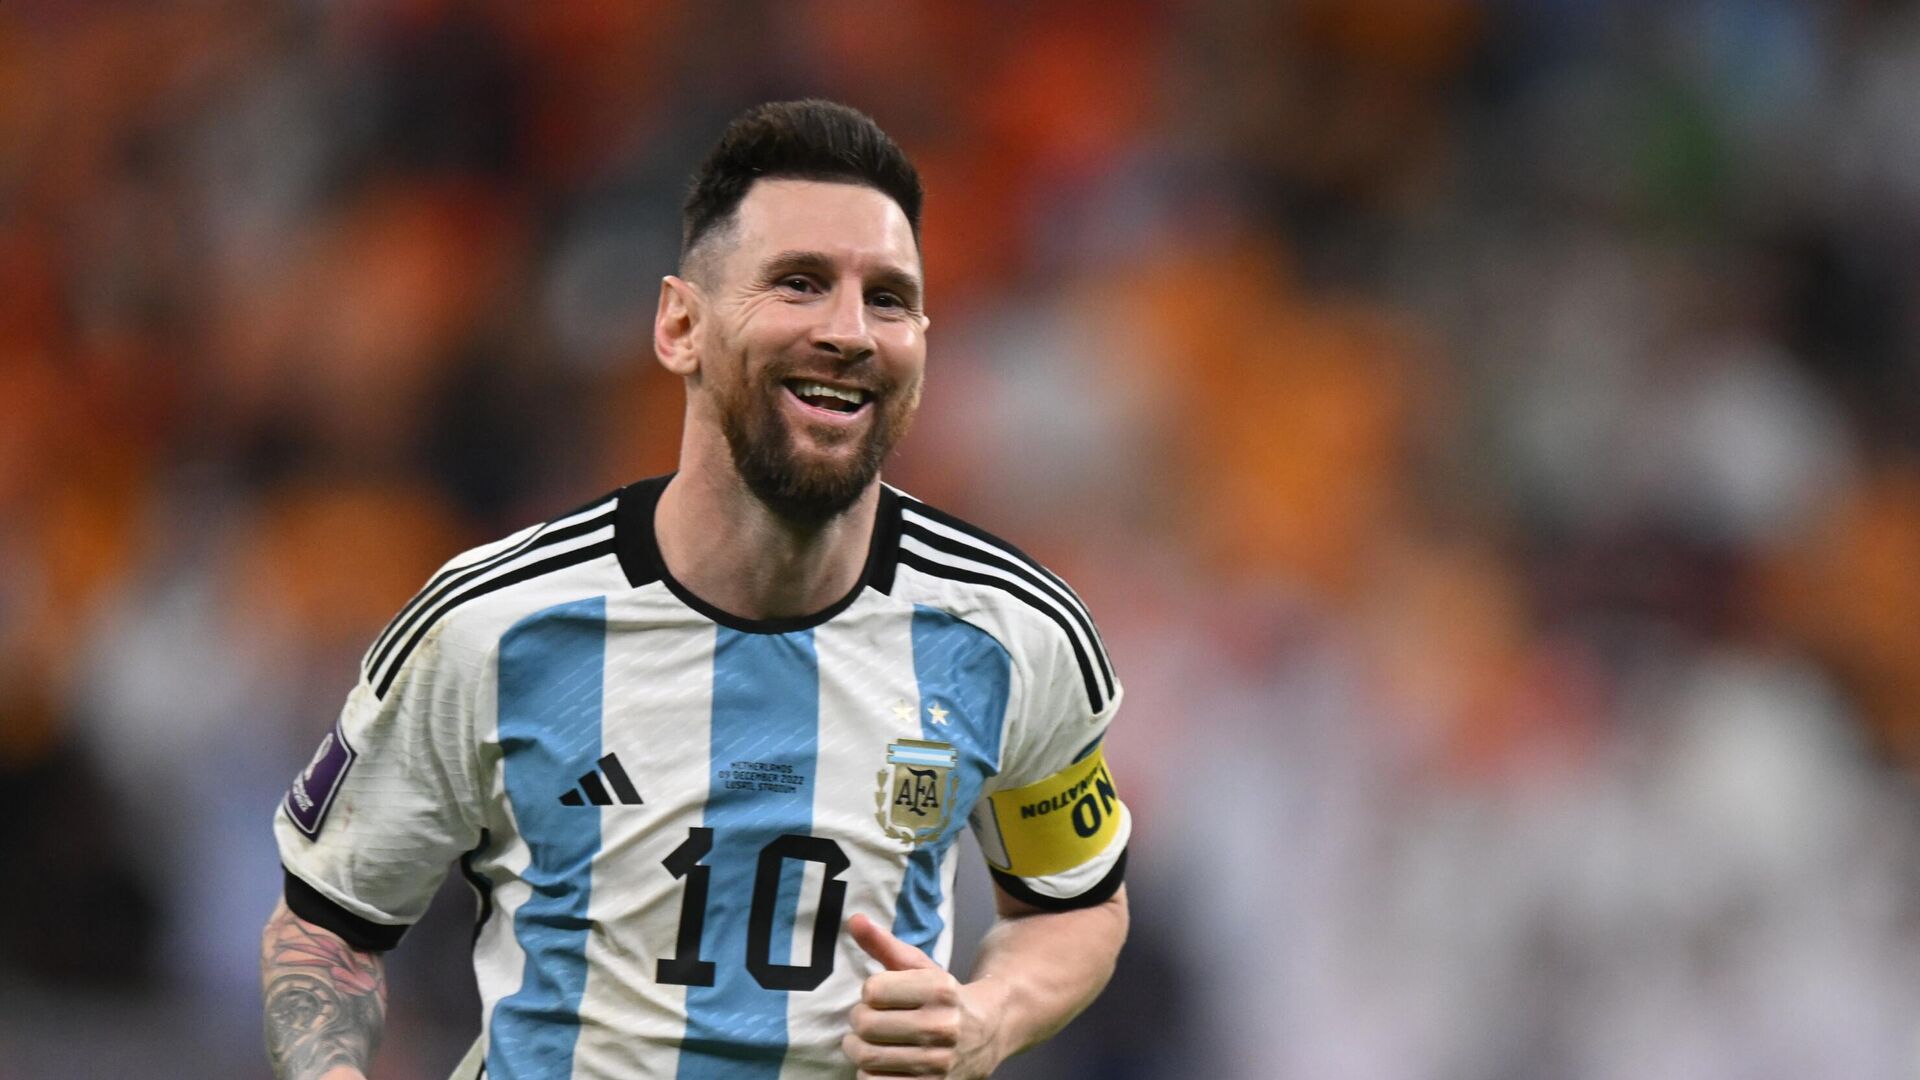 Lionel Messi during the match between Netherlands and Argentina at FIFA World Cup in Qatar - Sputnik India, 1920, 19.12.2022